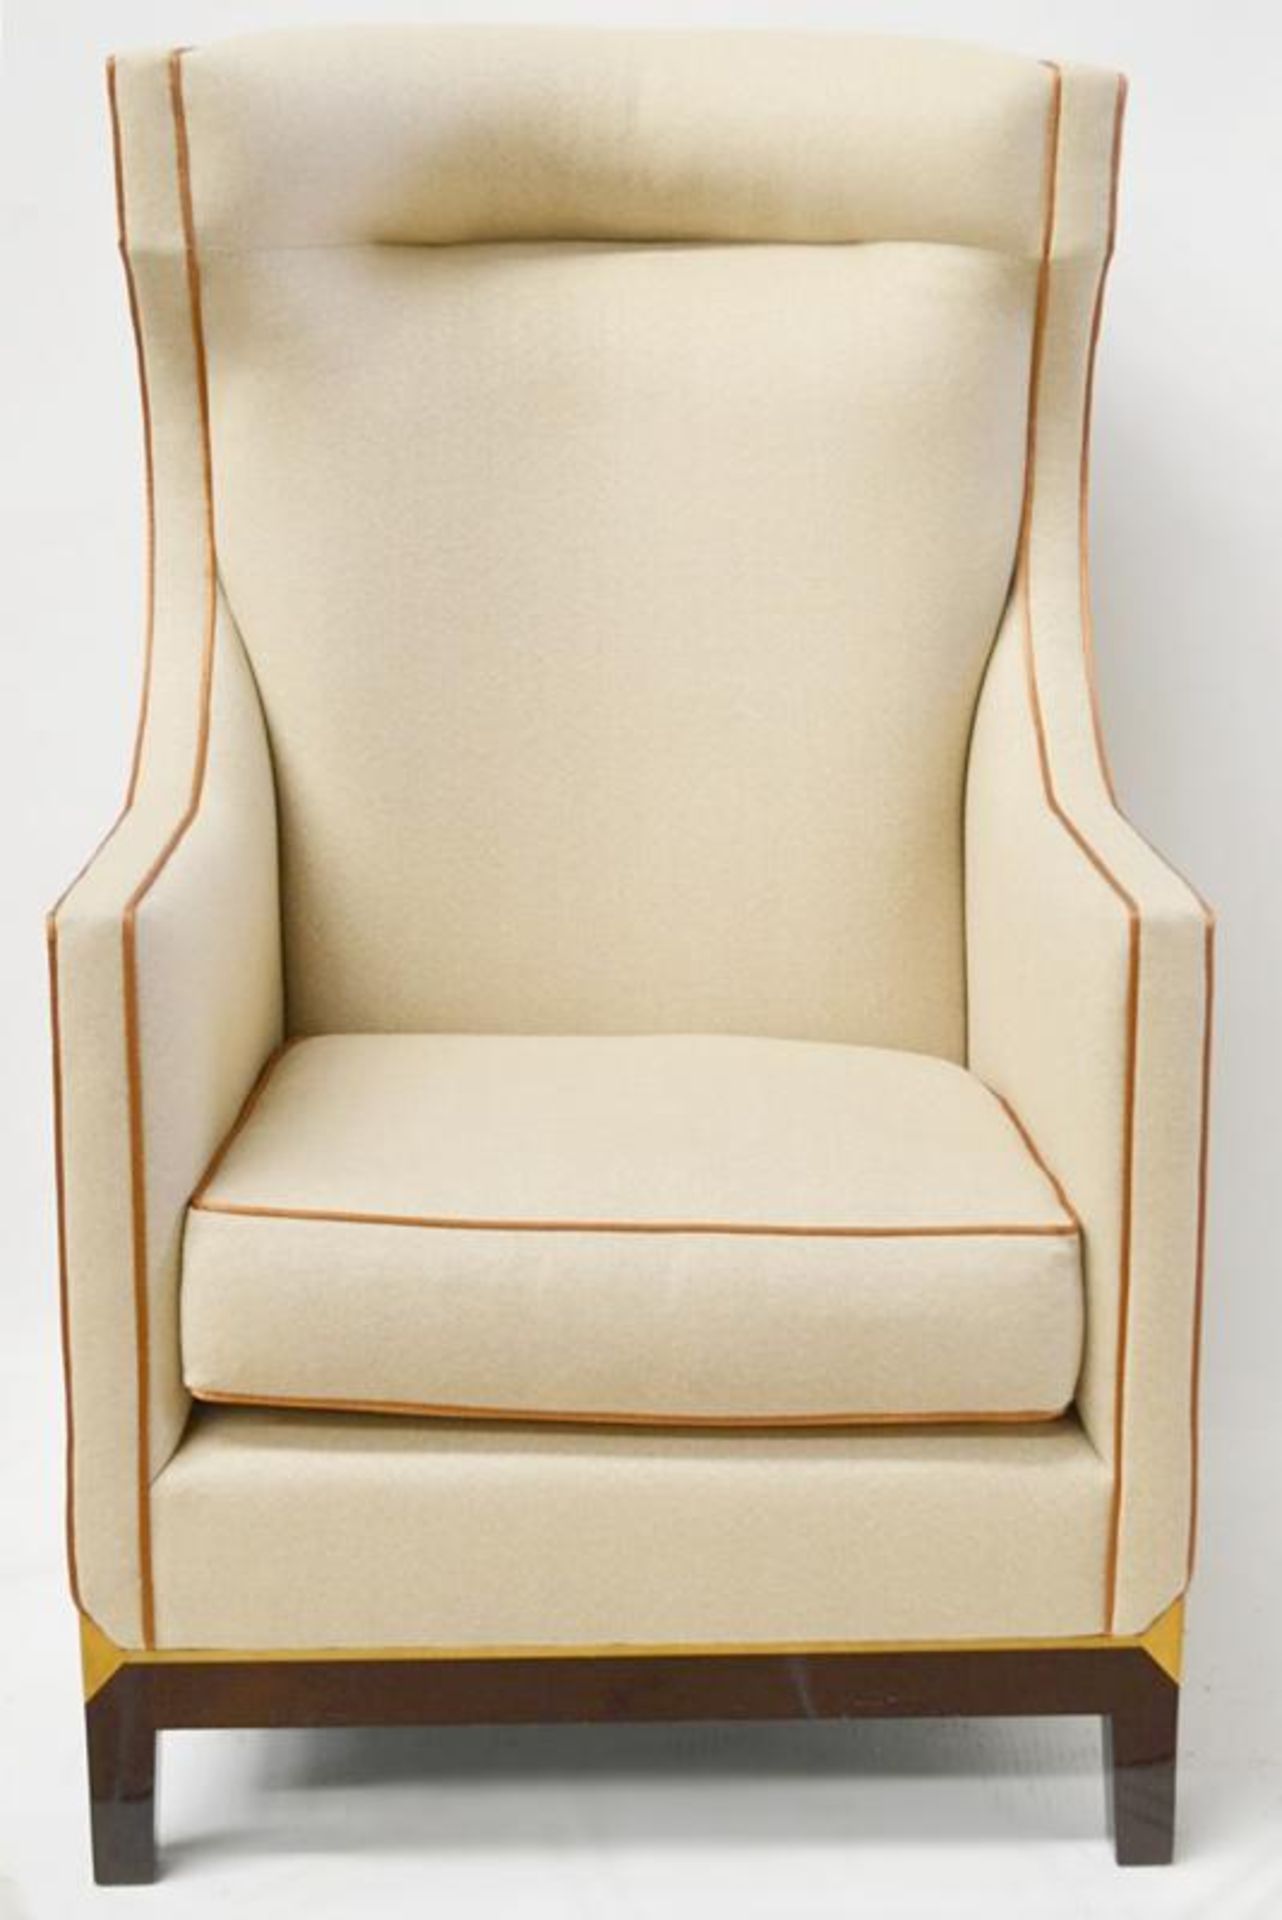 1 x Artistic Upholstery Ltd 'Burlington' Wing Back Chair With A Weatherill Stool In Matching Fabric - Image 3 of 10